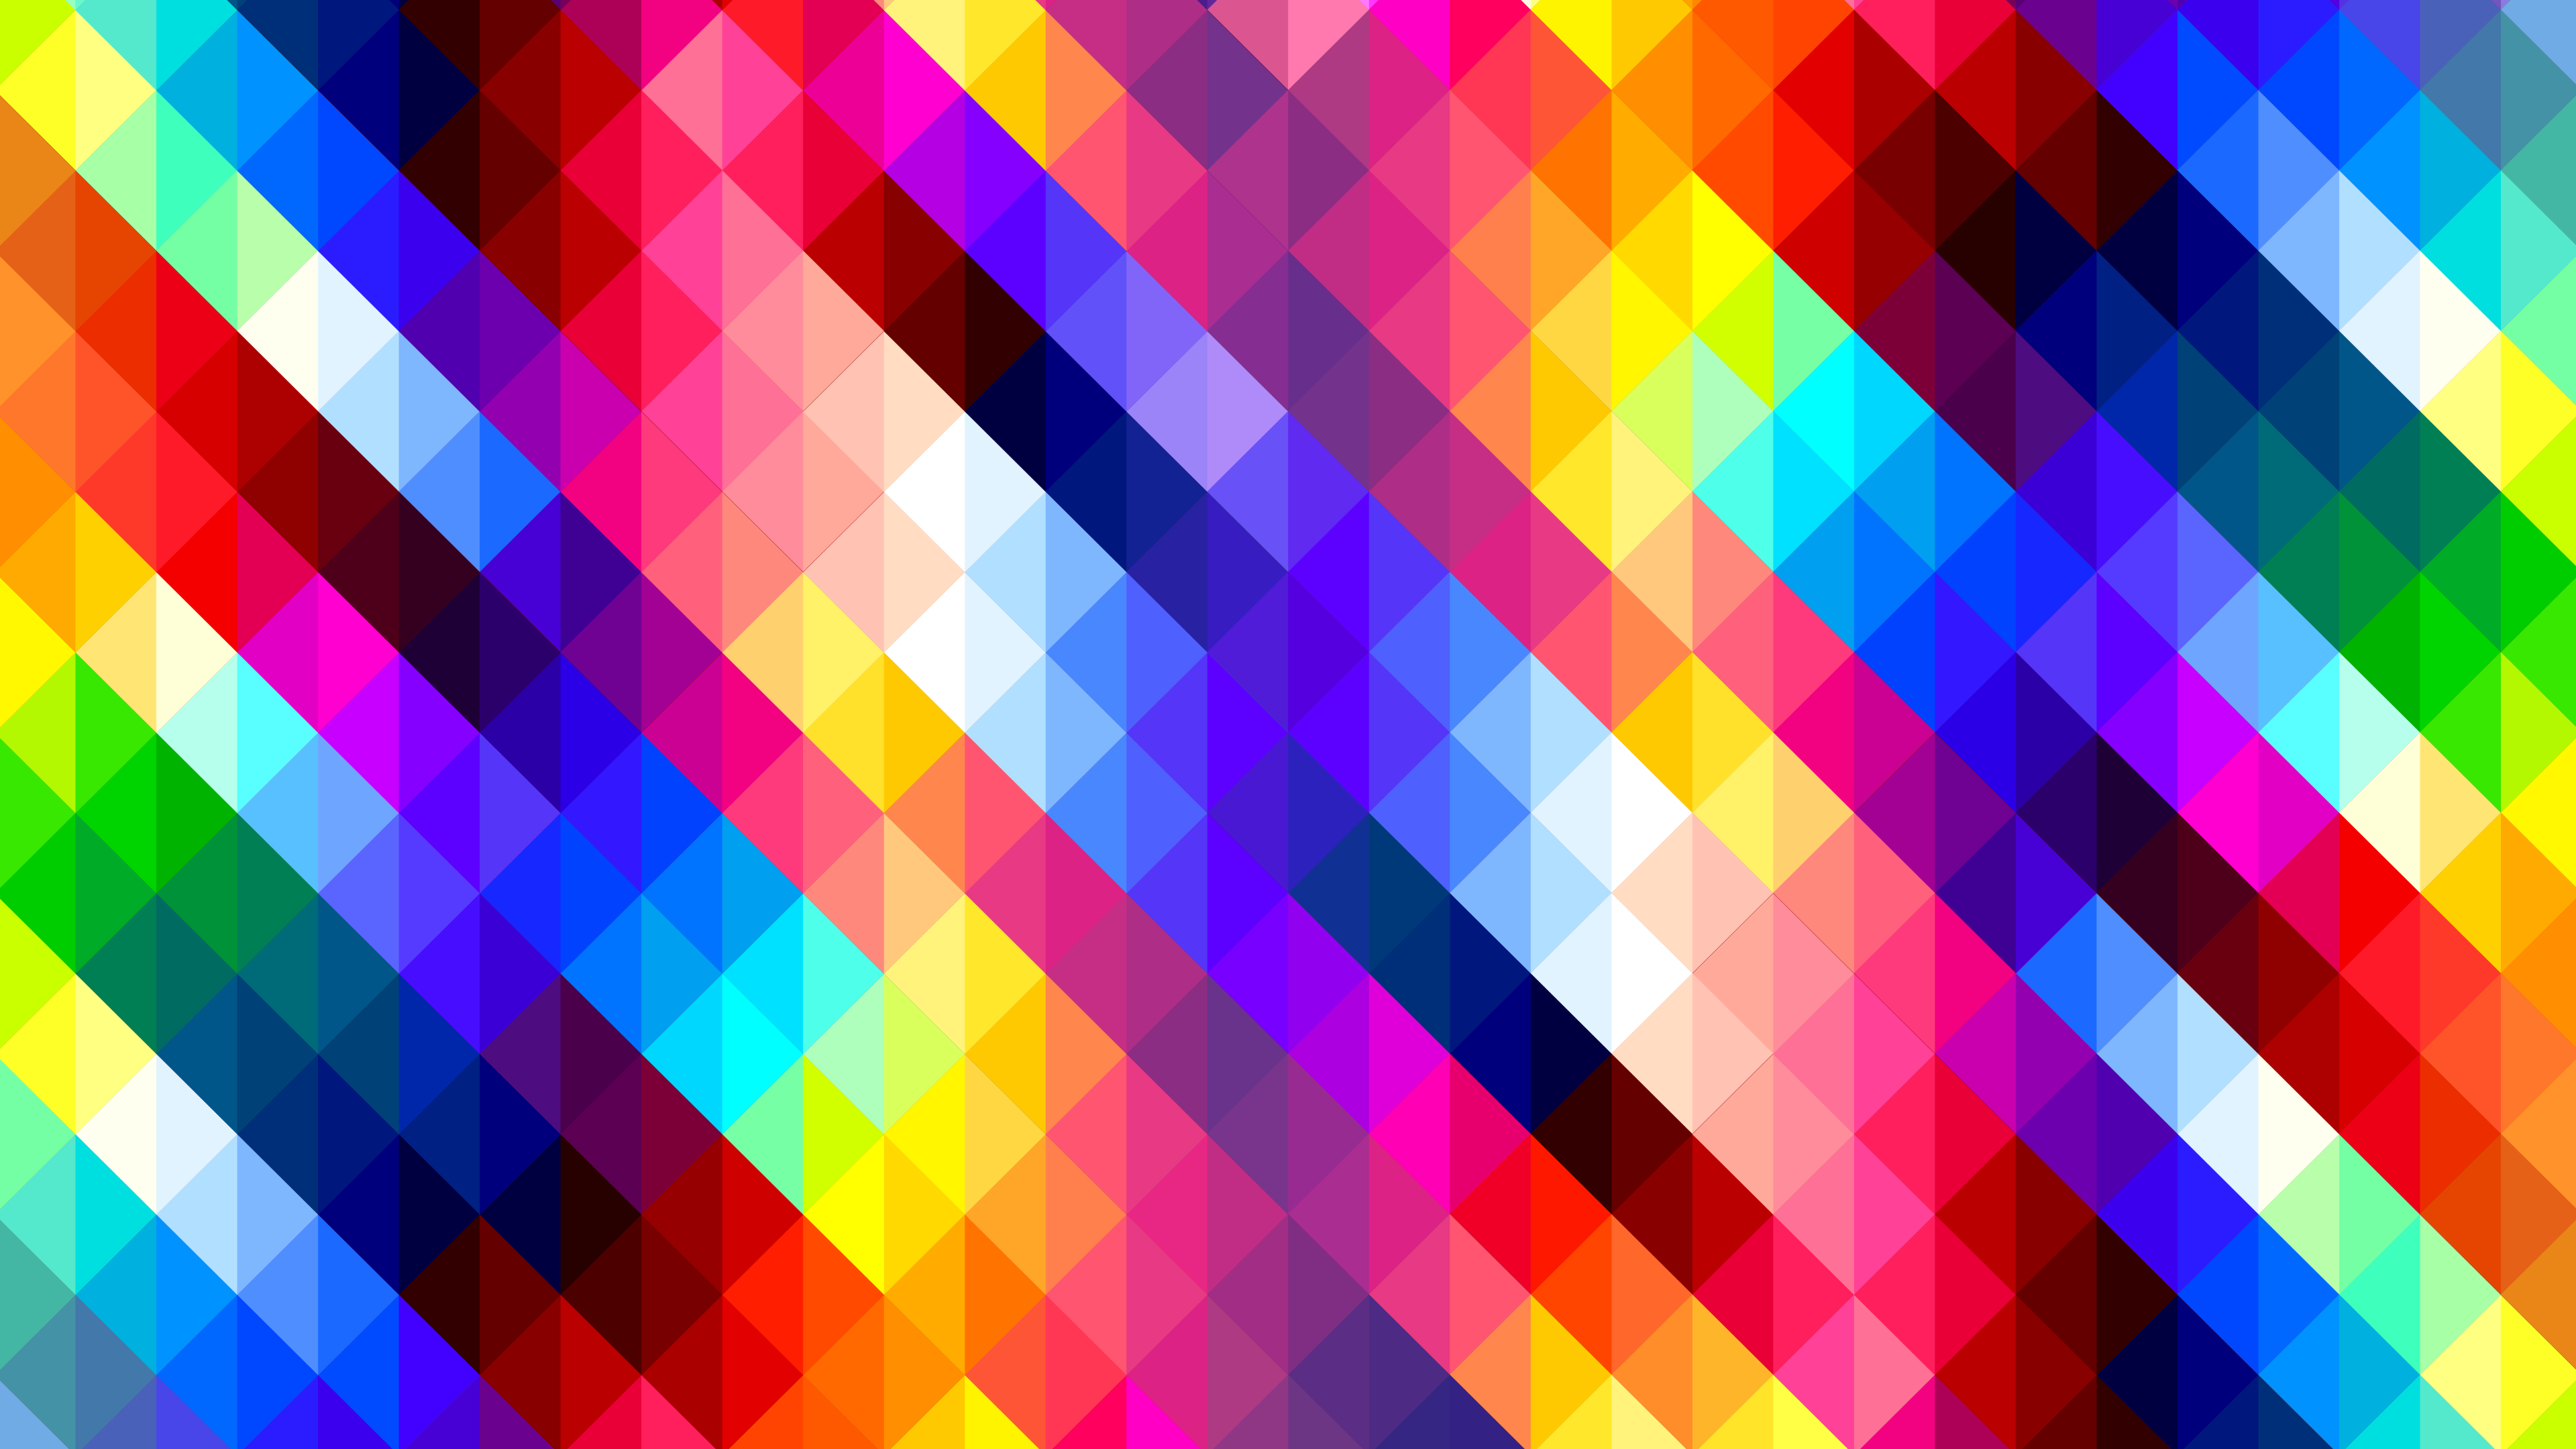 Rhombus Colorful Shapes Wallpaper HD Abstract K Wallpapers Images Photos And Background